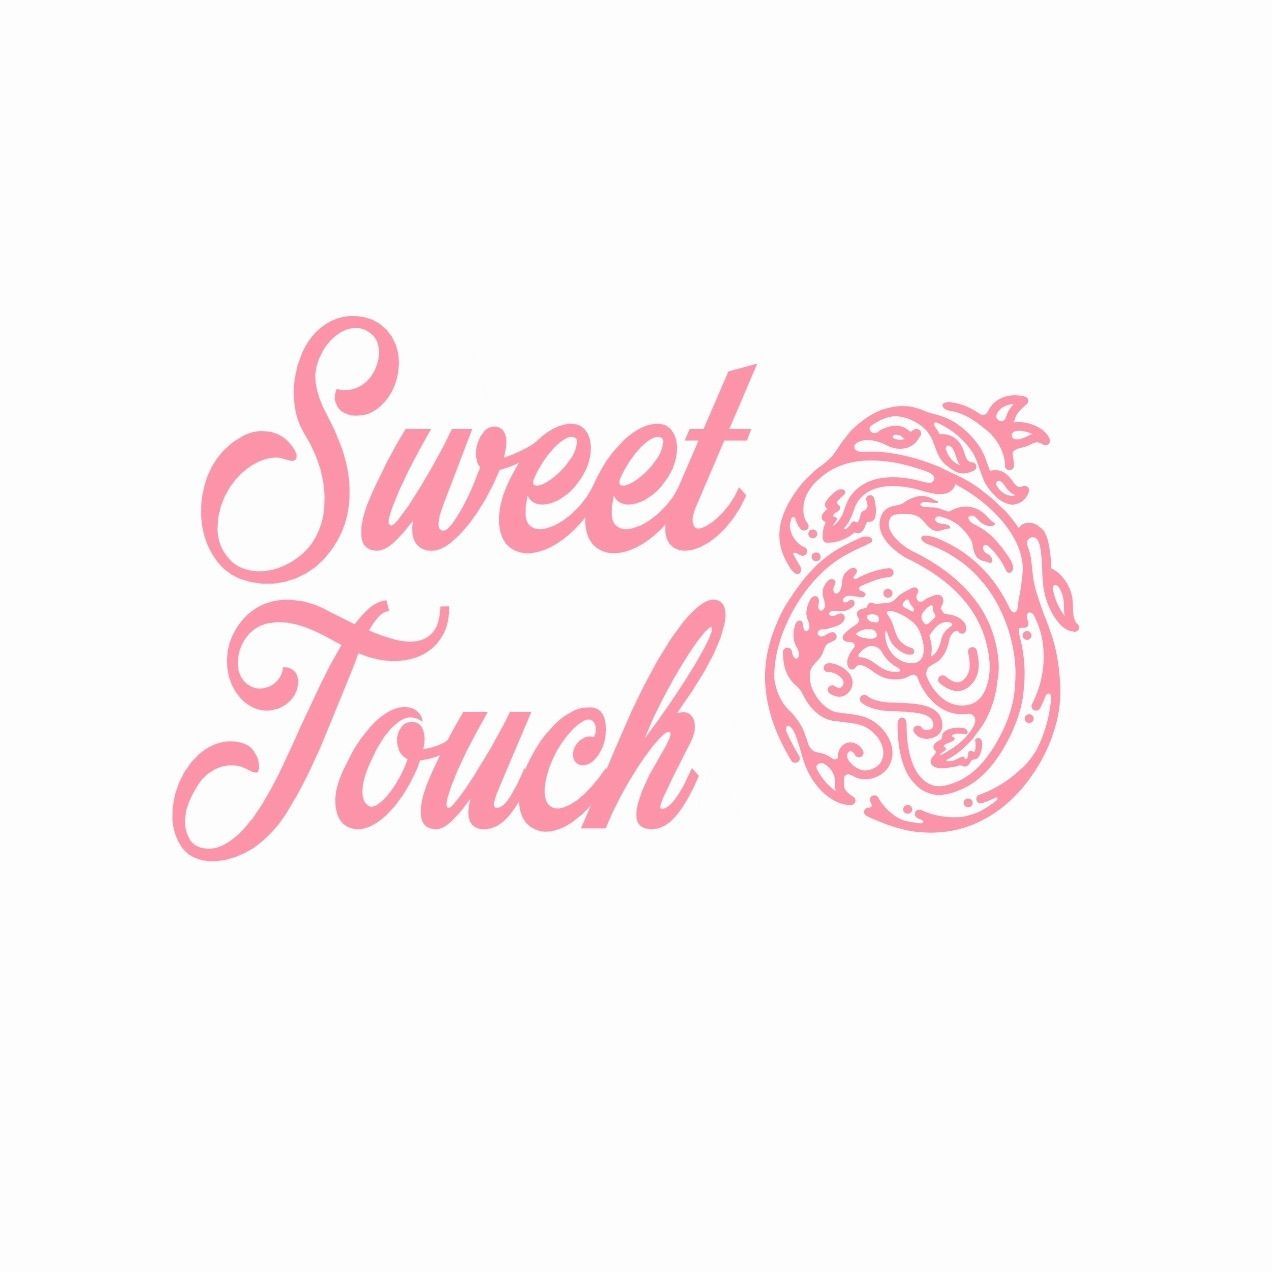 Sweet Touch, 5755 Oberlin Dr, 208, San Diego, 92121